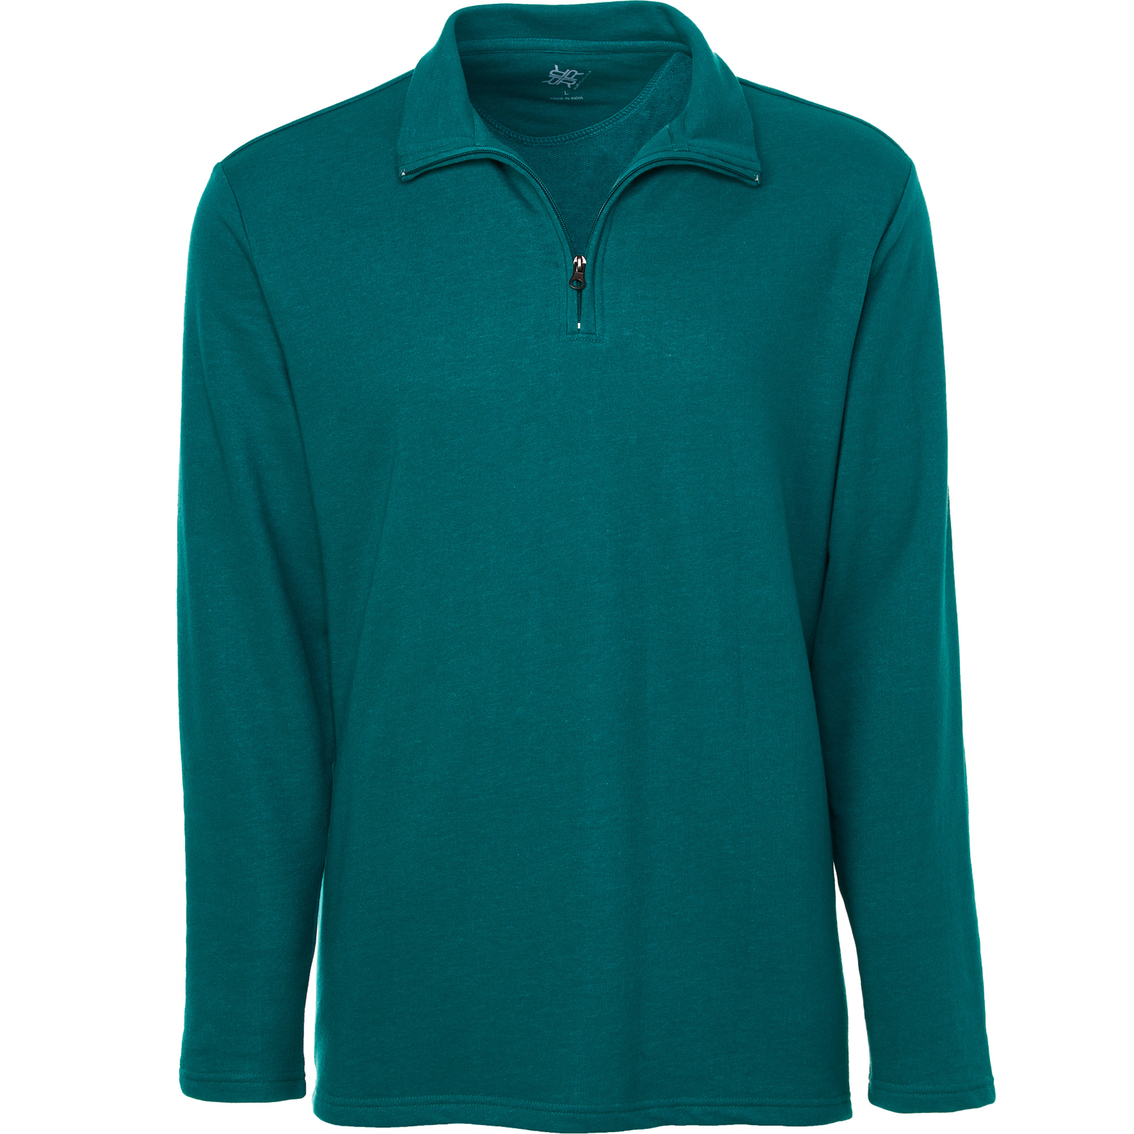 R&r Casual Quarter Zip Knit Top | Shirts | Clothing & Accessories ...